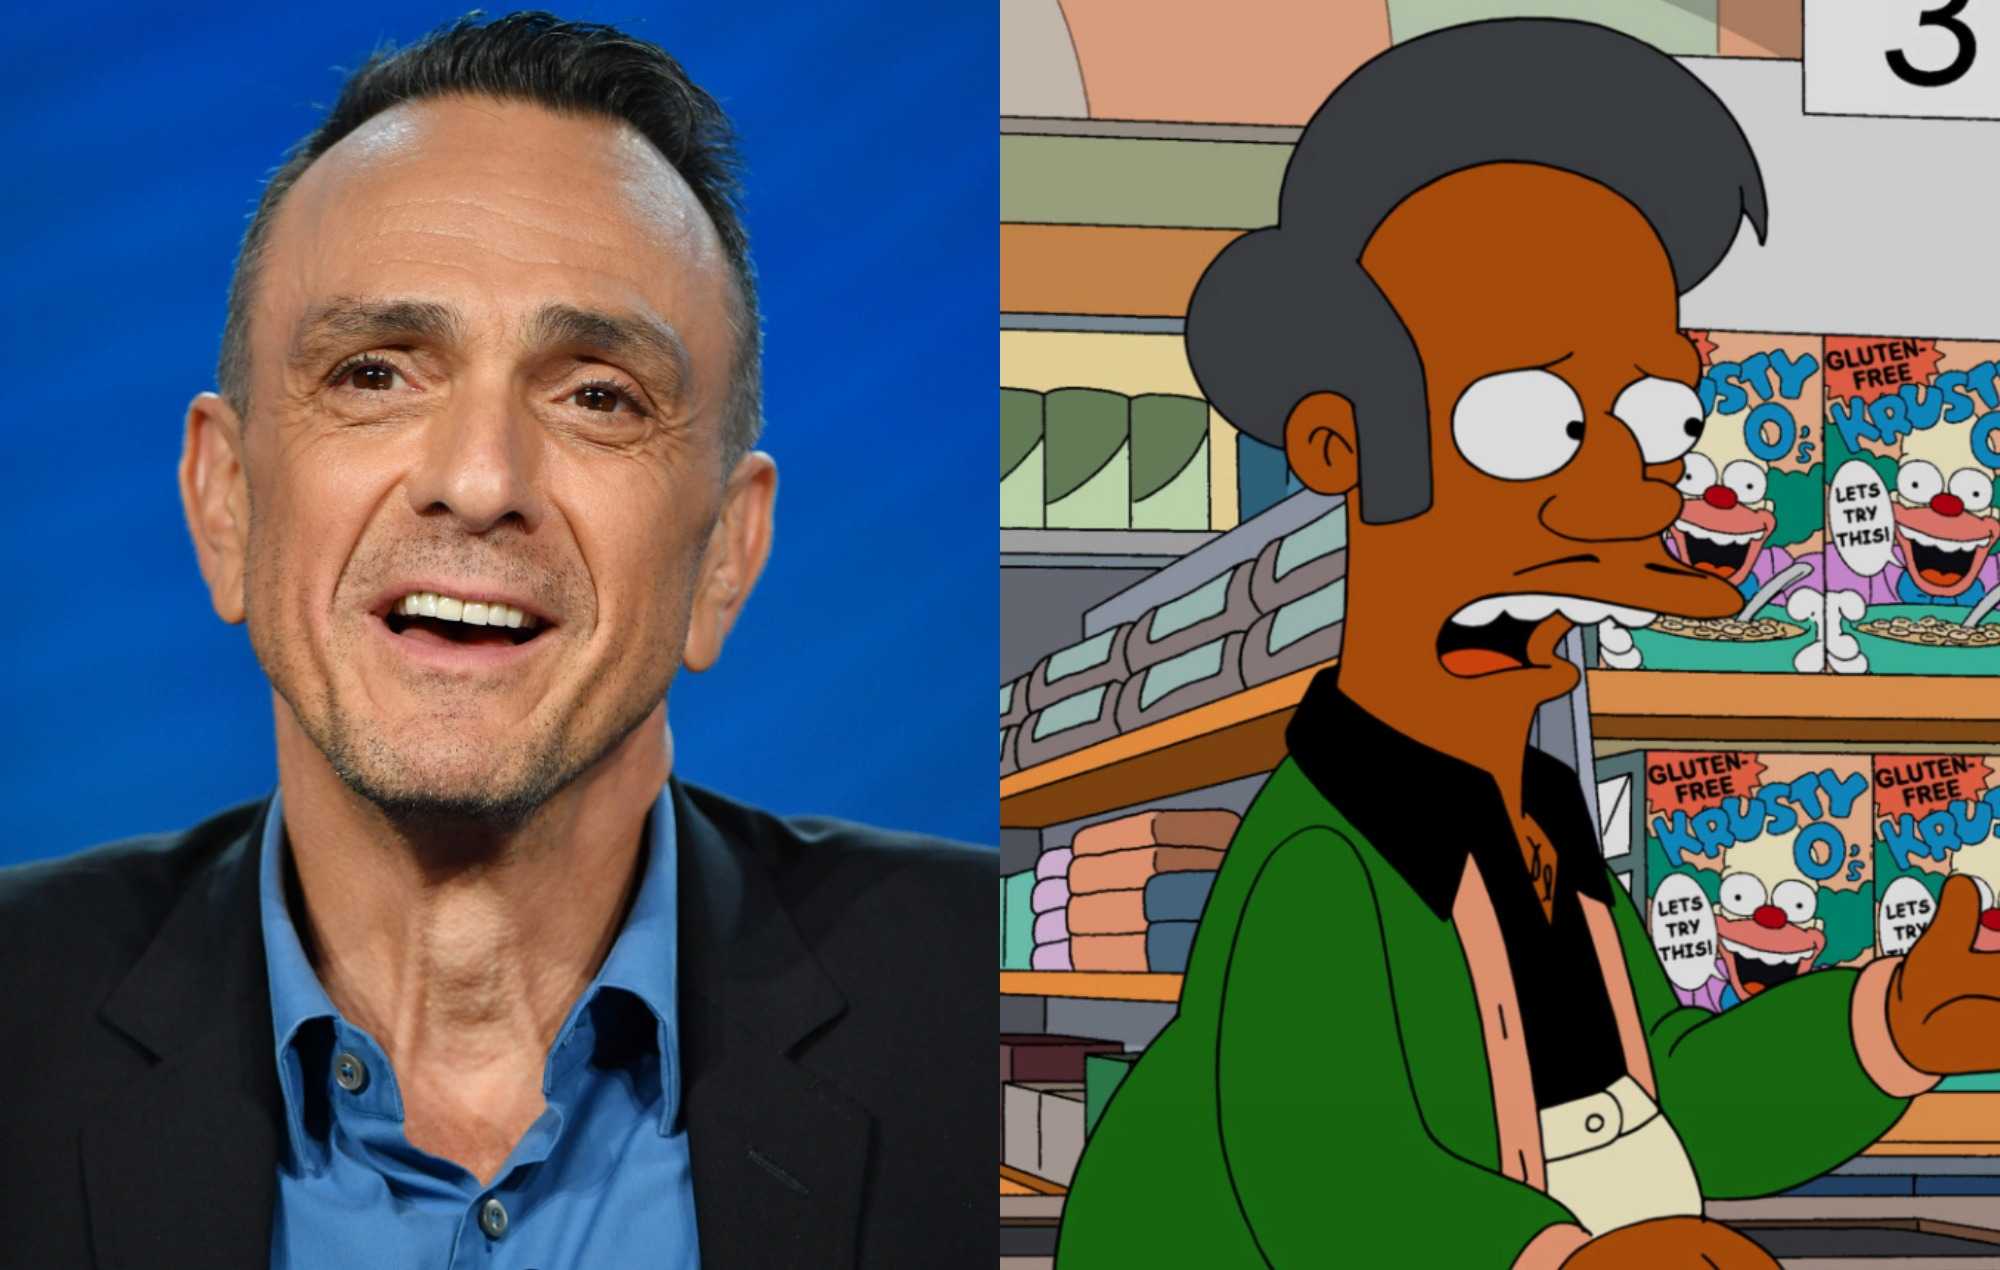 Hank Azaria's departure from Apu role: Addressing The Simpsons controversy